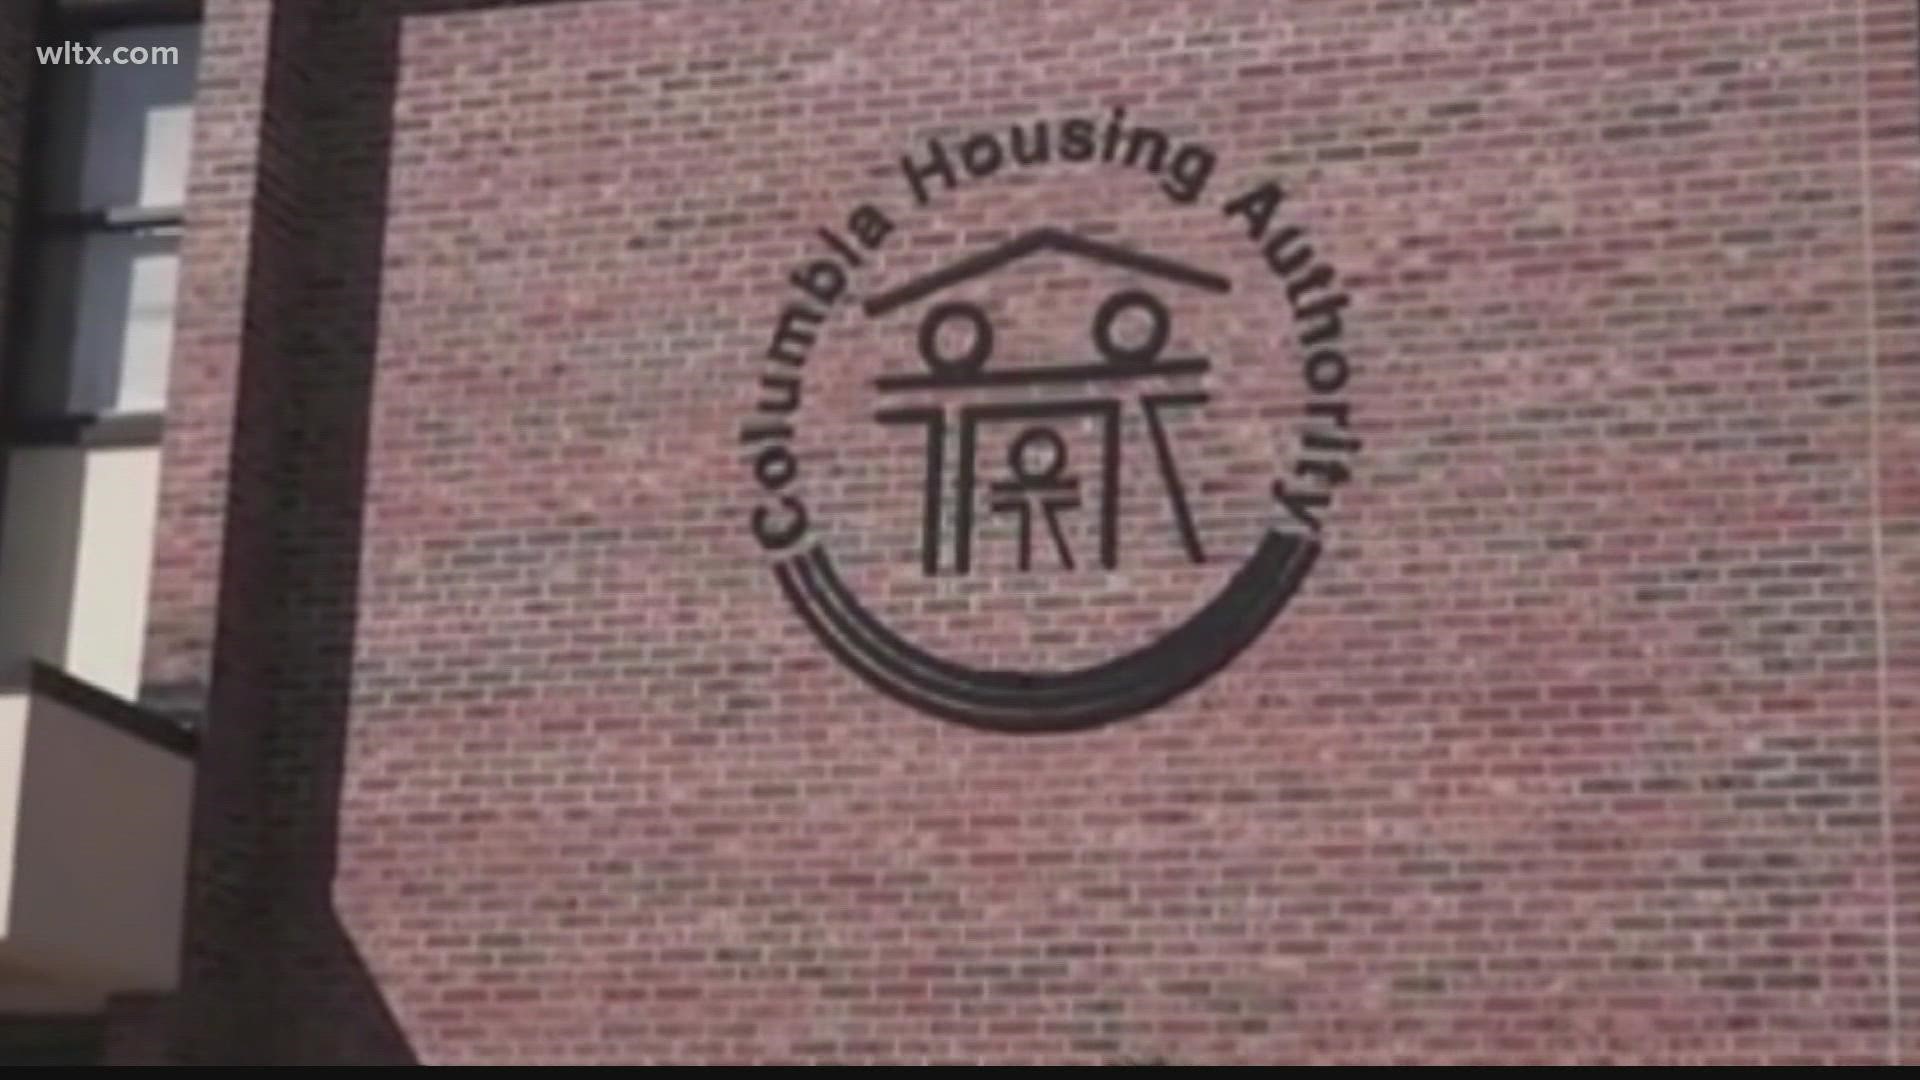 Columbia Housing says efforts to curb evictions are bearing some fruit and fewer people are now at risk of eviction.